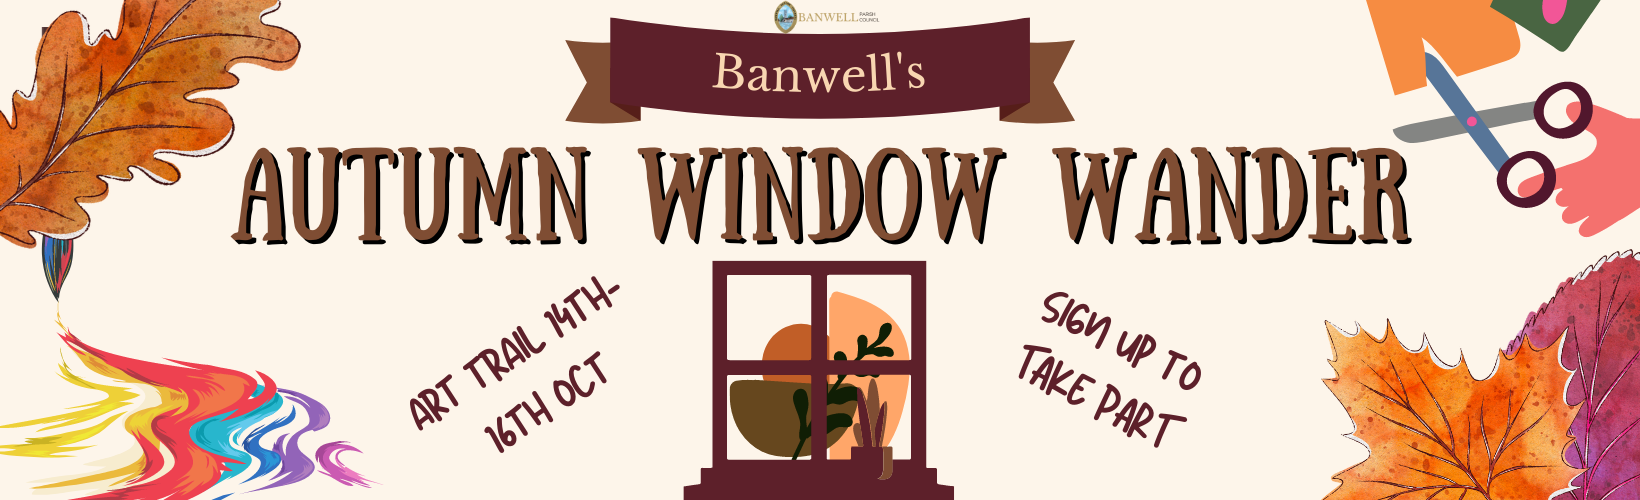 autumn window wander banner with cartoon leaves and window